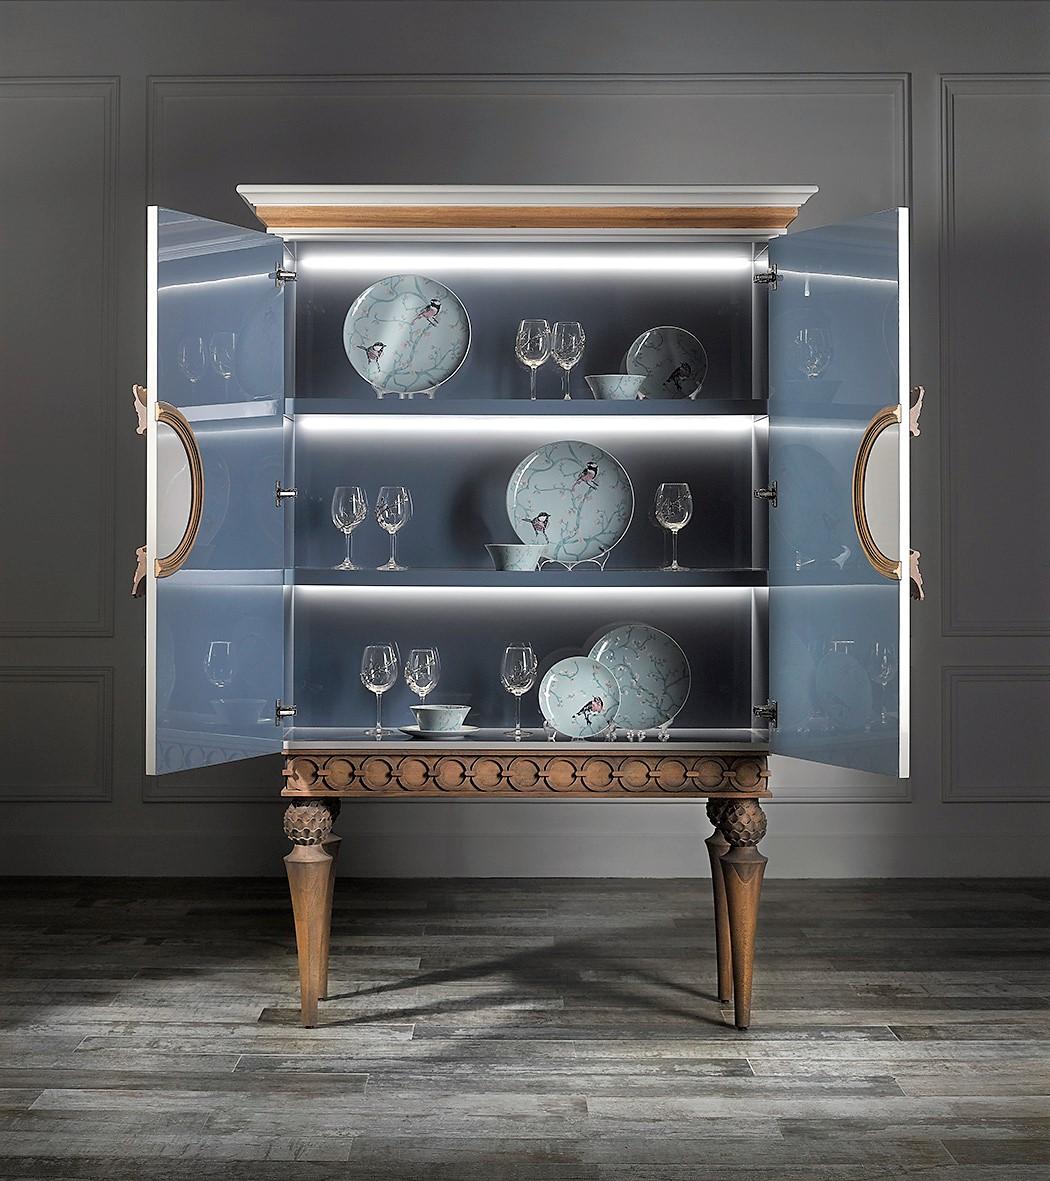 The Artedo cabinet is an eclectic piece that effortlessly combines contrasting styles, resulting in an original design with a unique character perfect for any ambiance. The classical details on the base and the carved legs, together with the crown